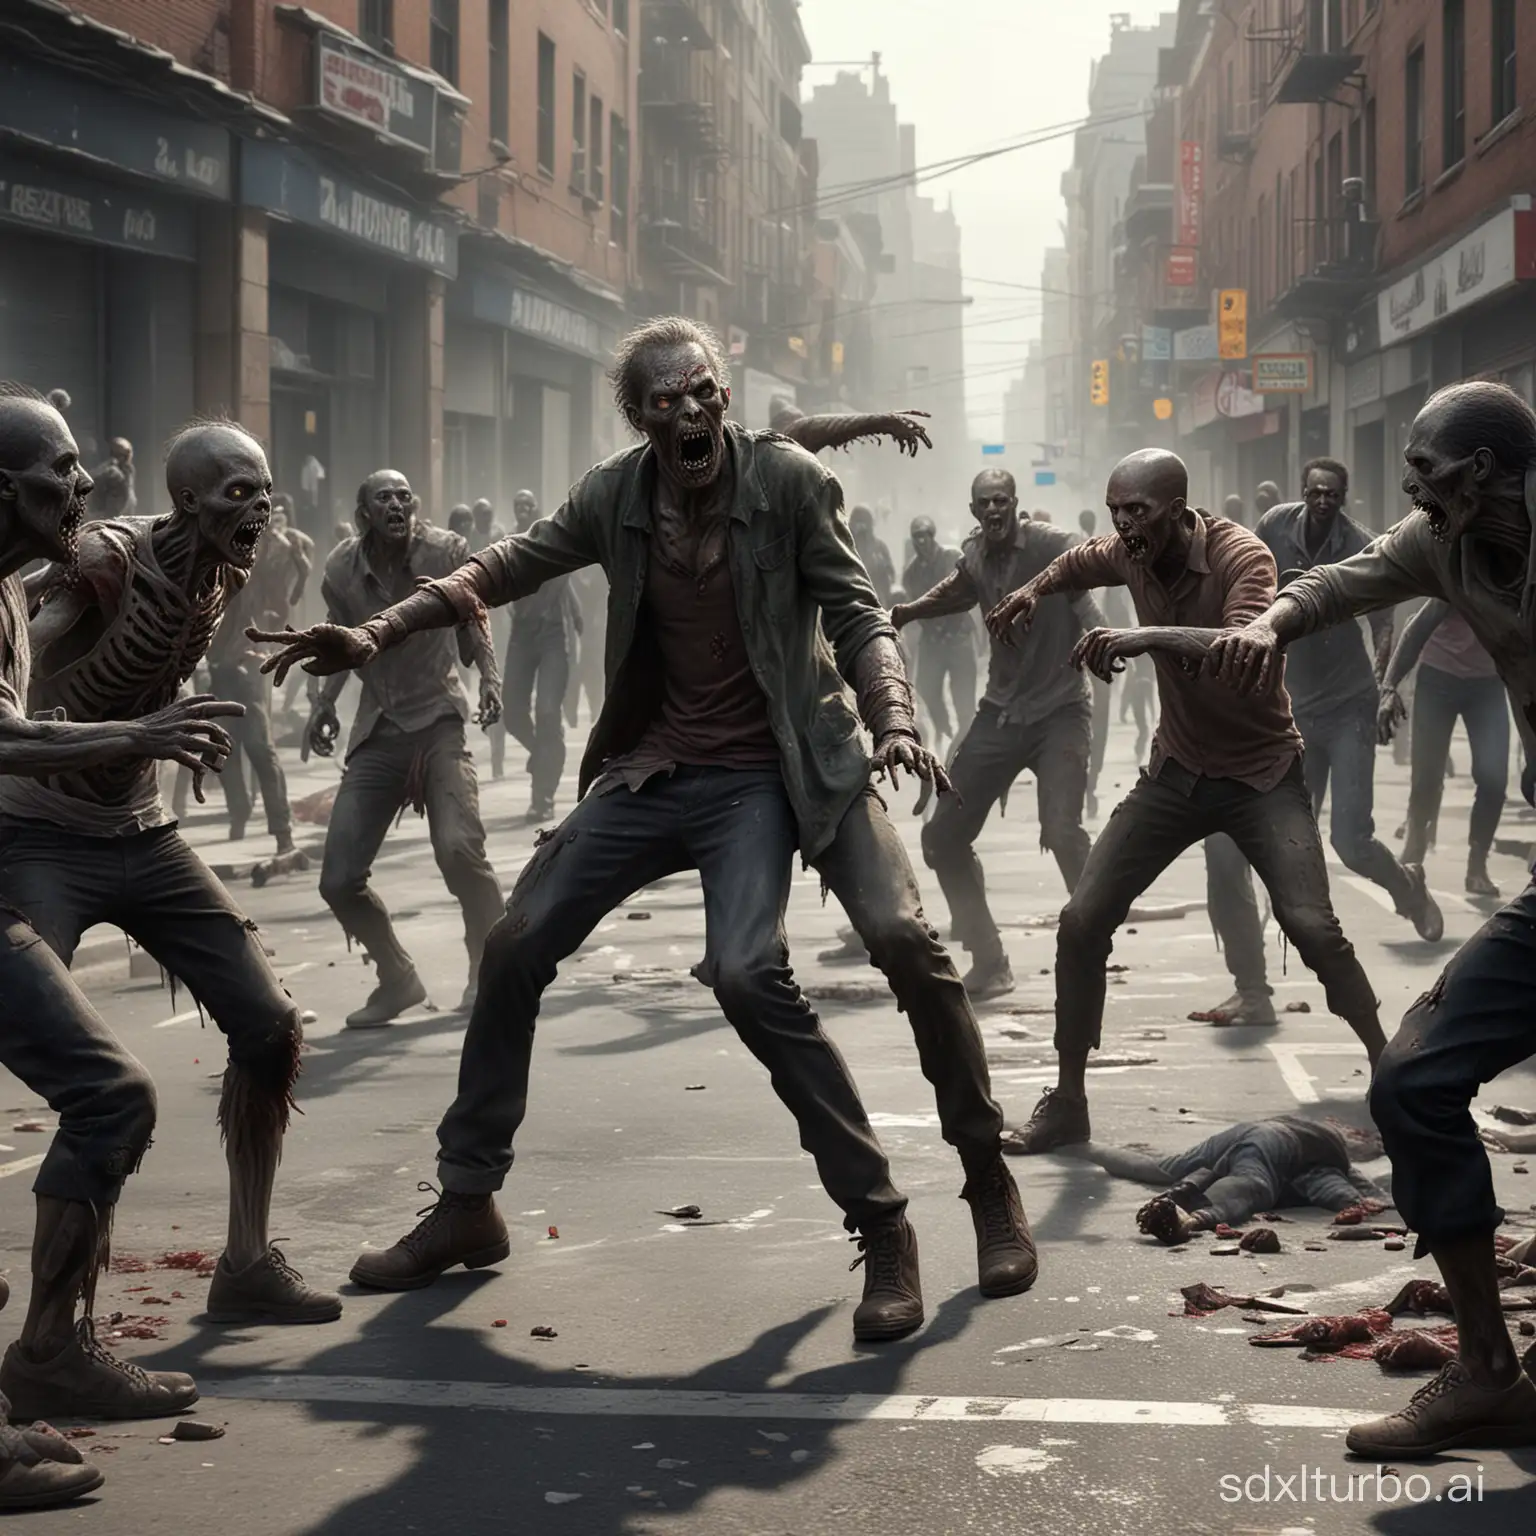 Draw a realistic picture of zombies and humans fighting on the street